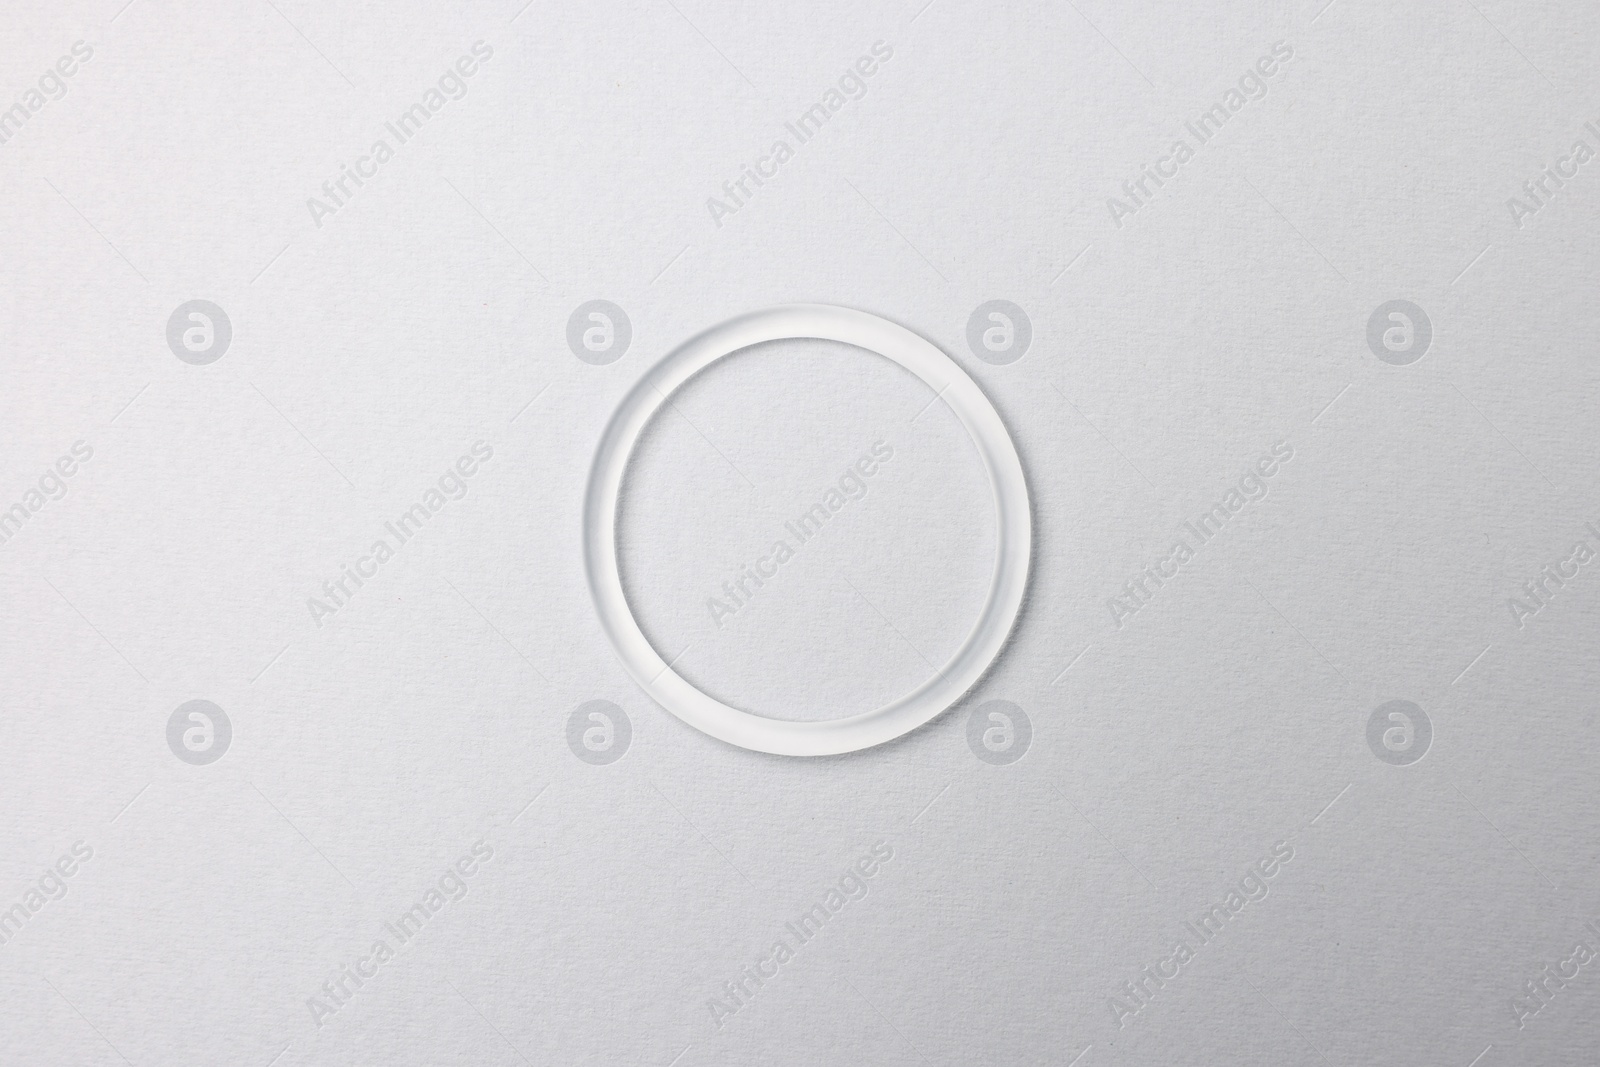 Photo of Diaphragm vaginal contraceptive ring on grey background, top view